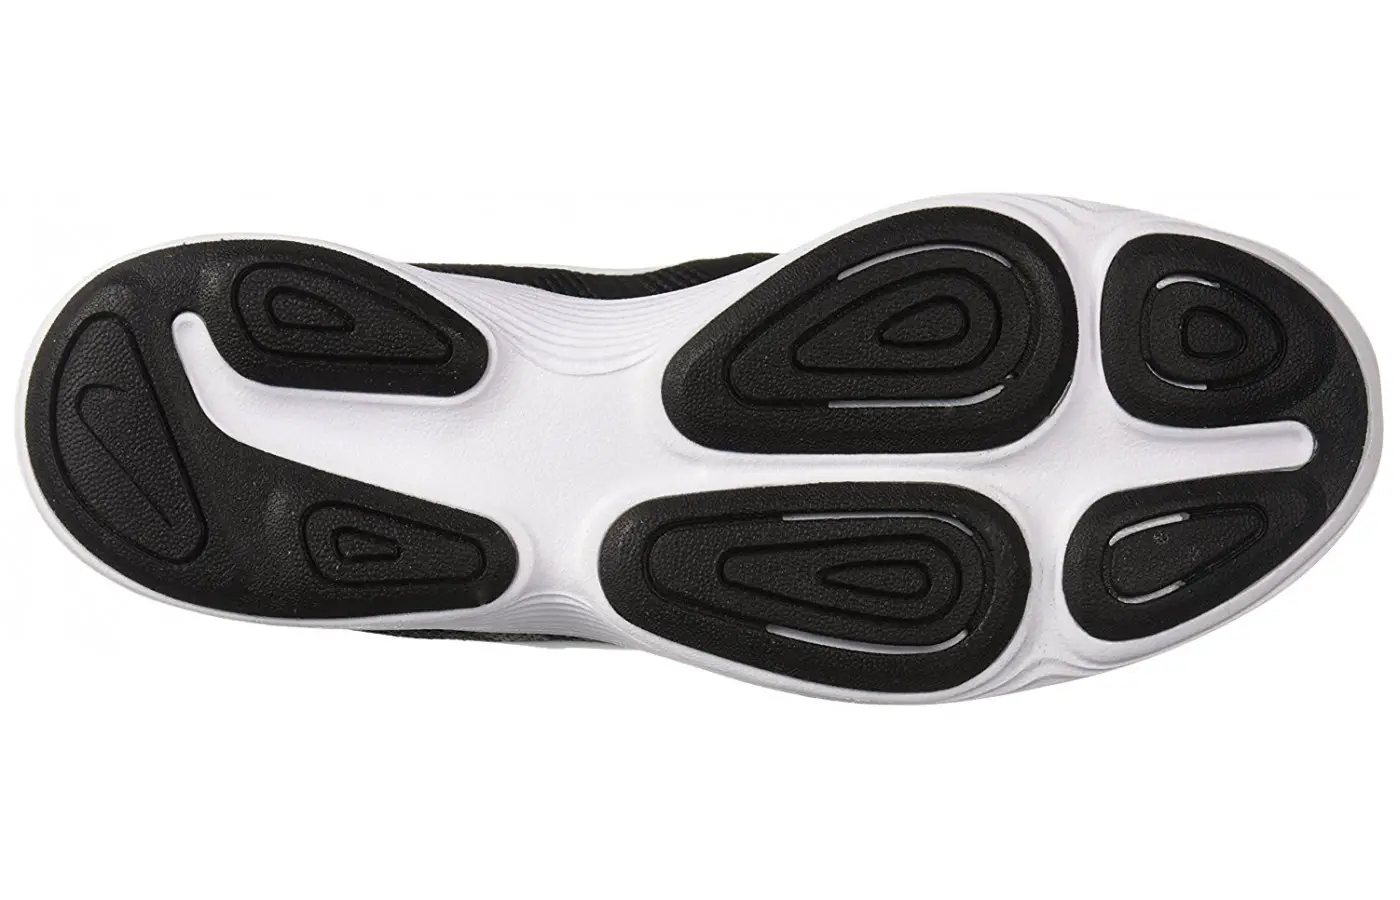 There are rubber pods on the outsole of the shoe.